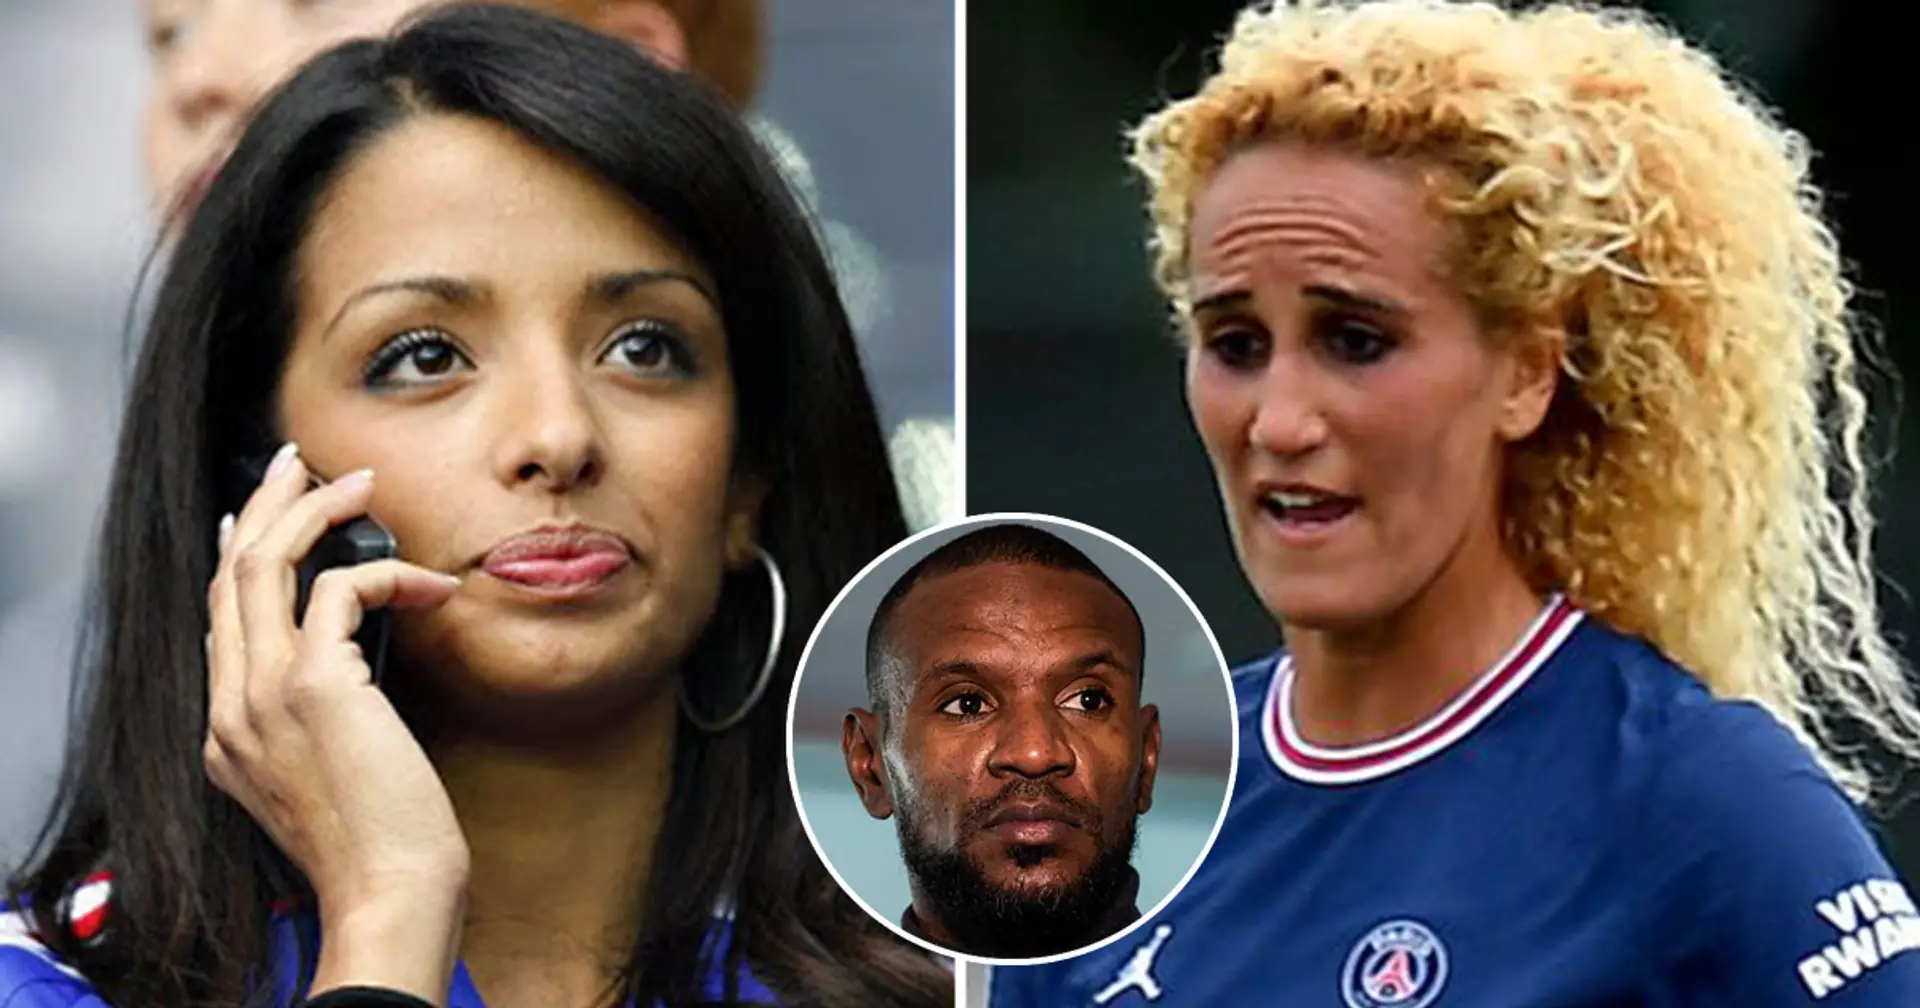 Shocking: Abidal's wife allegedly ordered attack on female PSG player